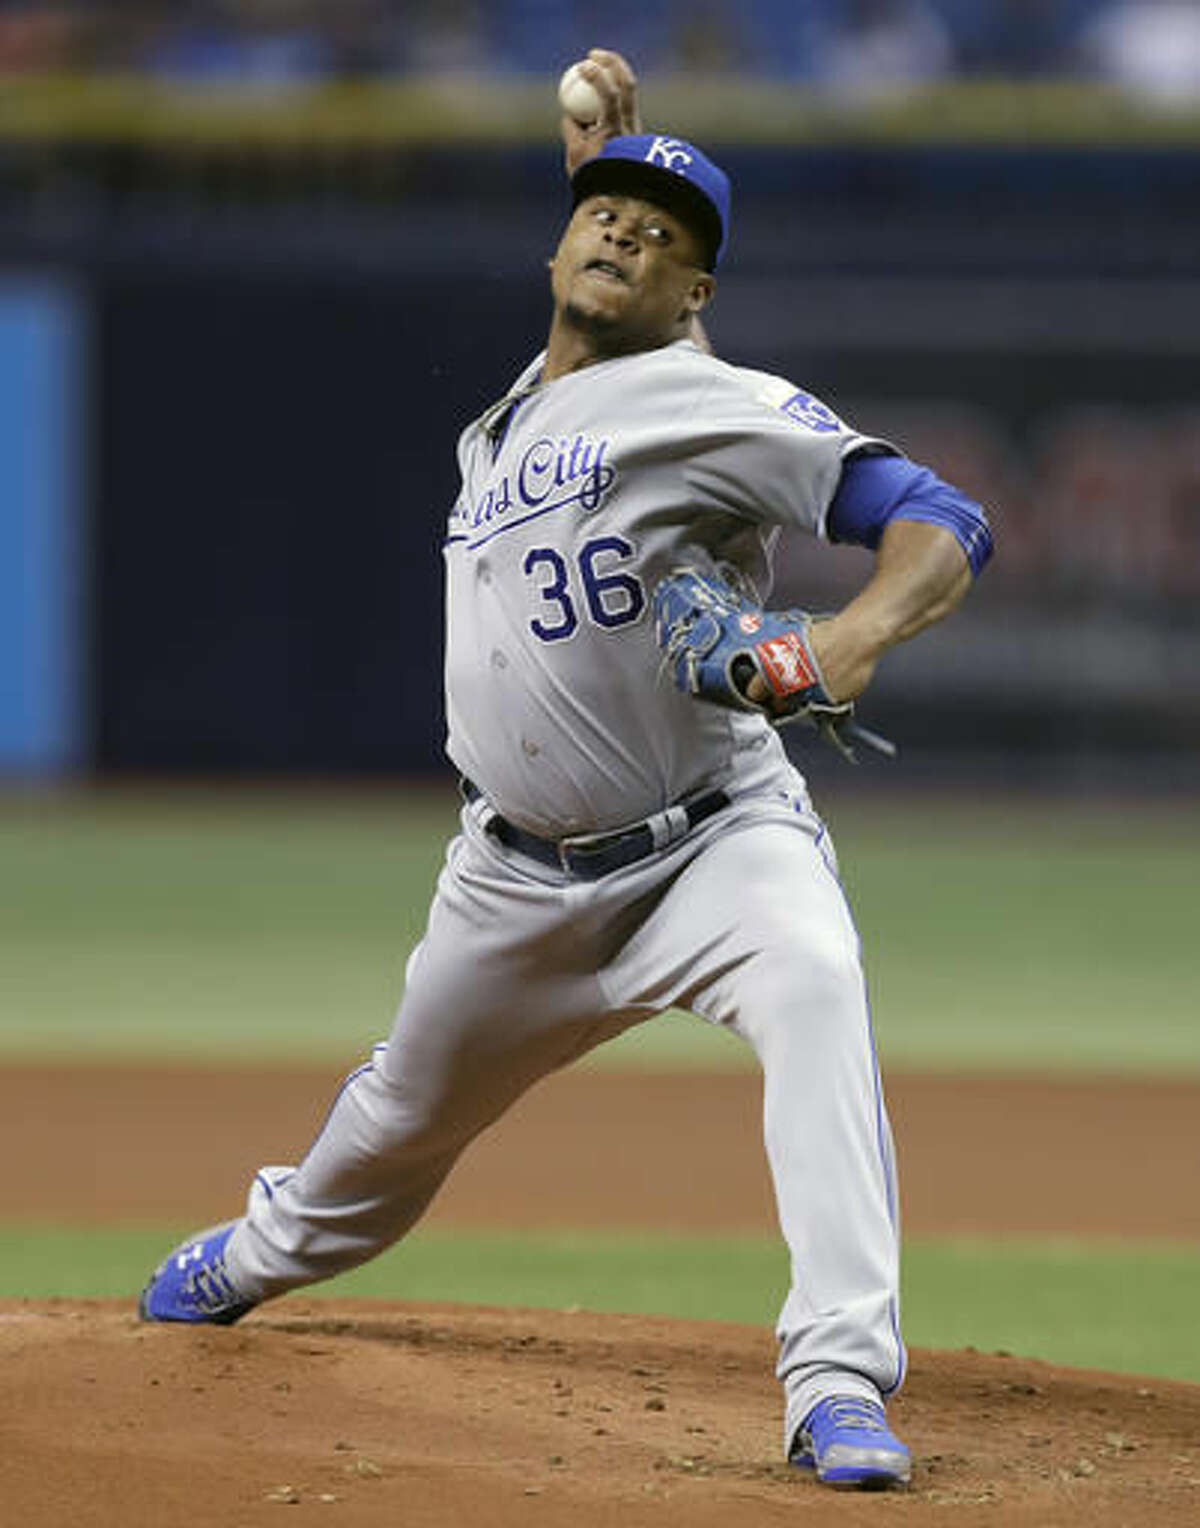 Kansas City Royals' Edinson Volquez pitches to the Tampa Bay Rays during the first inning of a baseball game Wednesday, Aug. 3, 2016, in St. Petersburg, Fla. (AP Photo/Chris O'Meara)